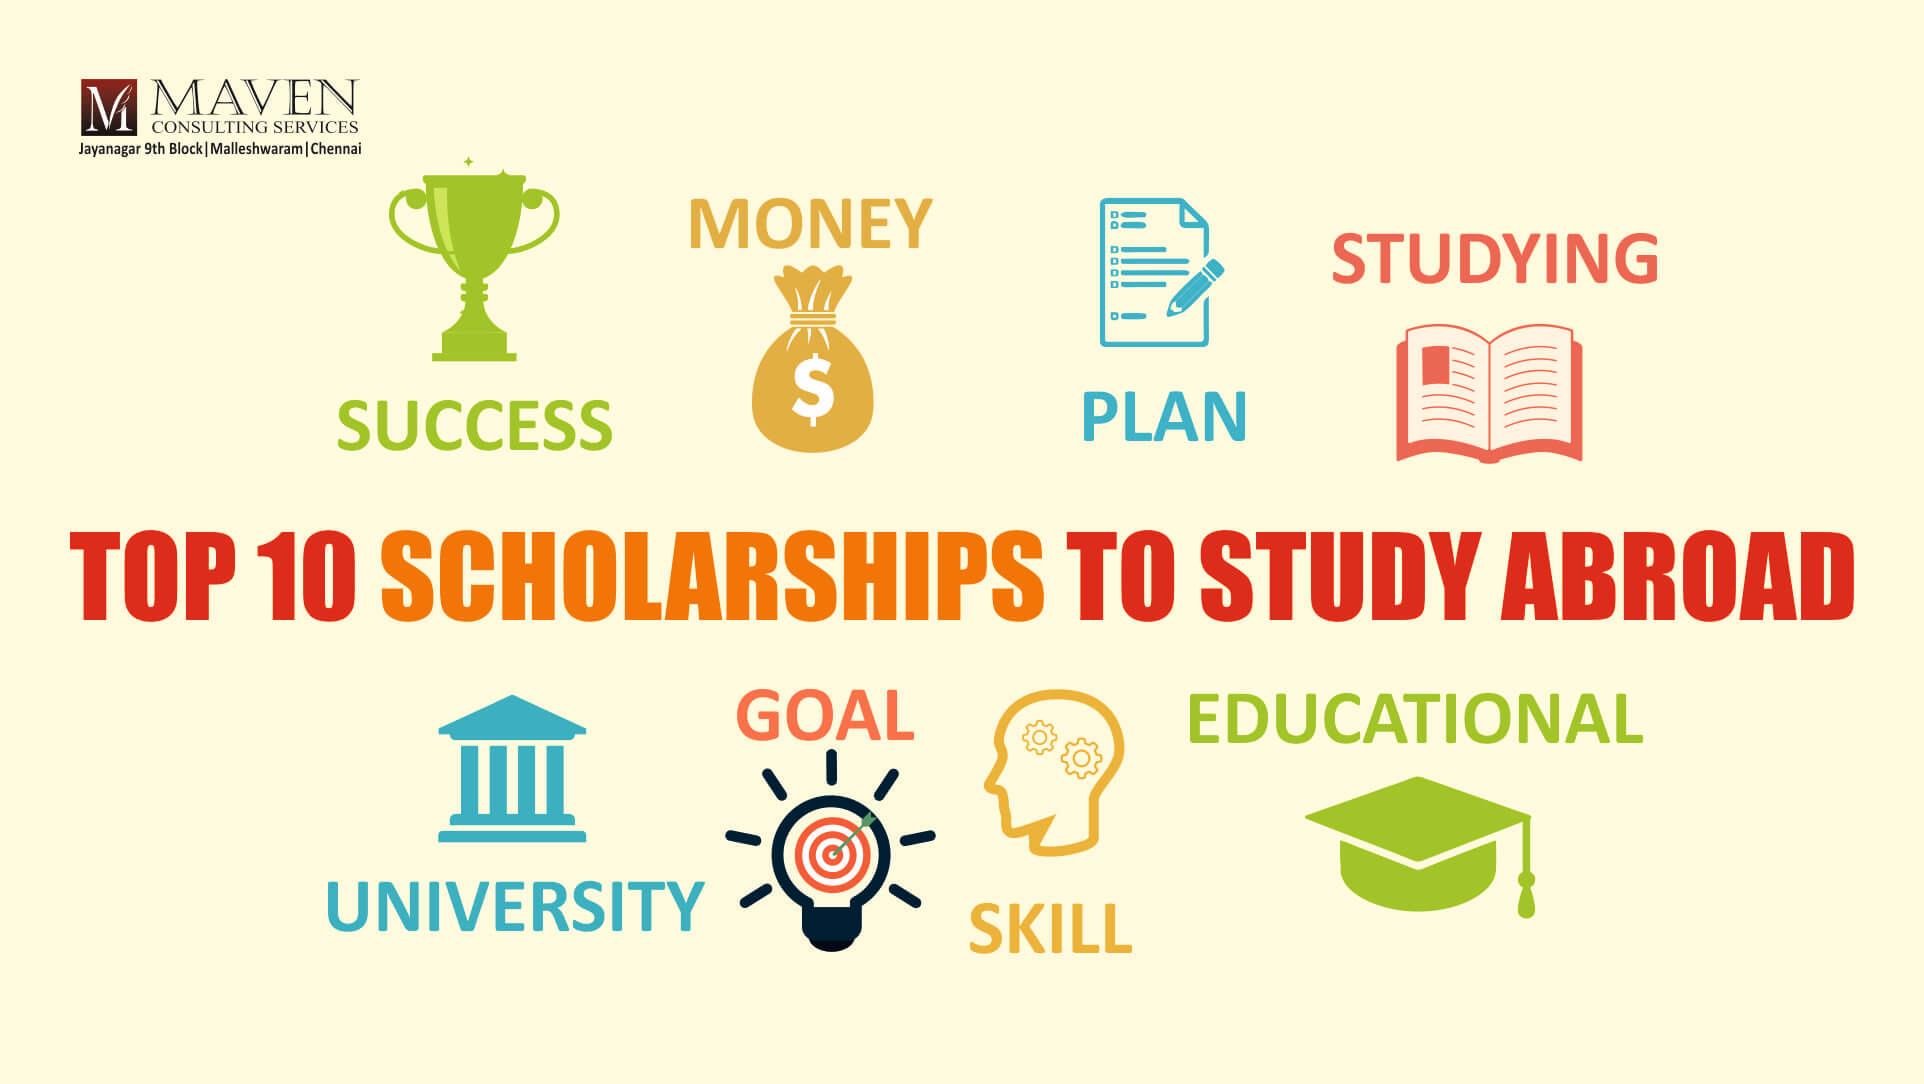 phd scholarships to study abroad